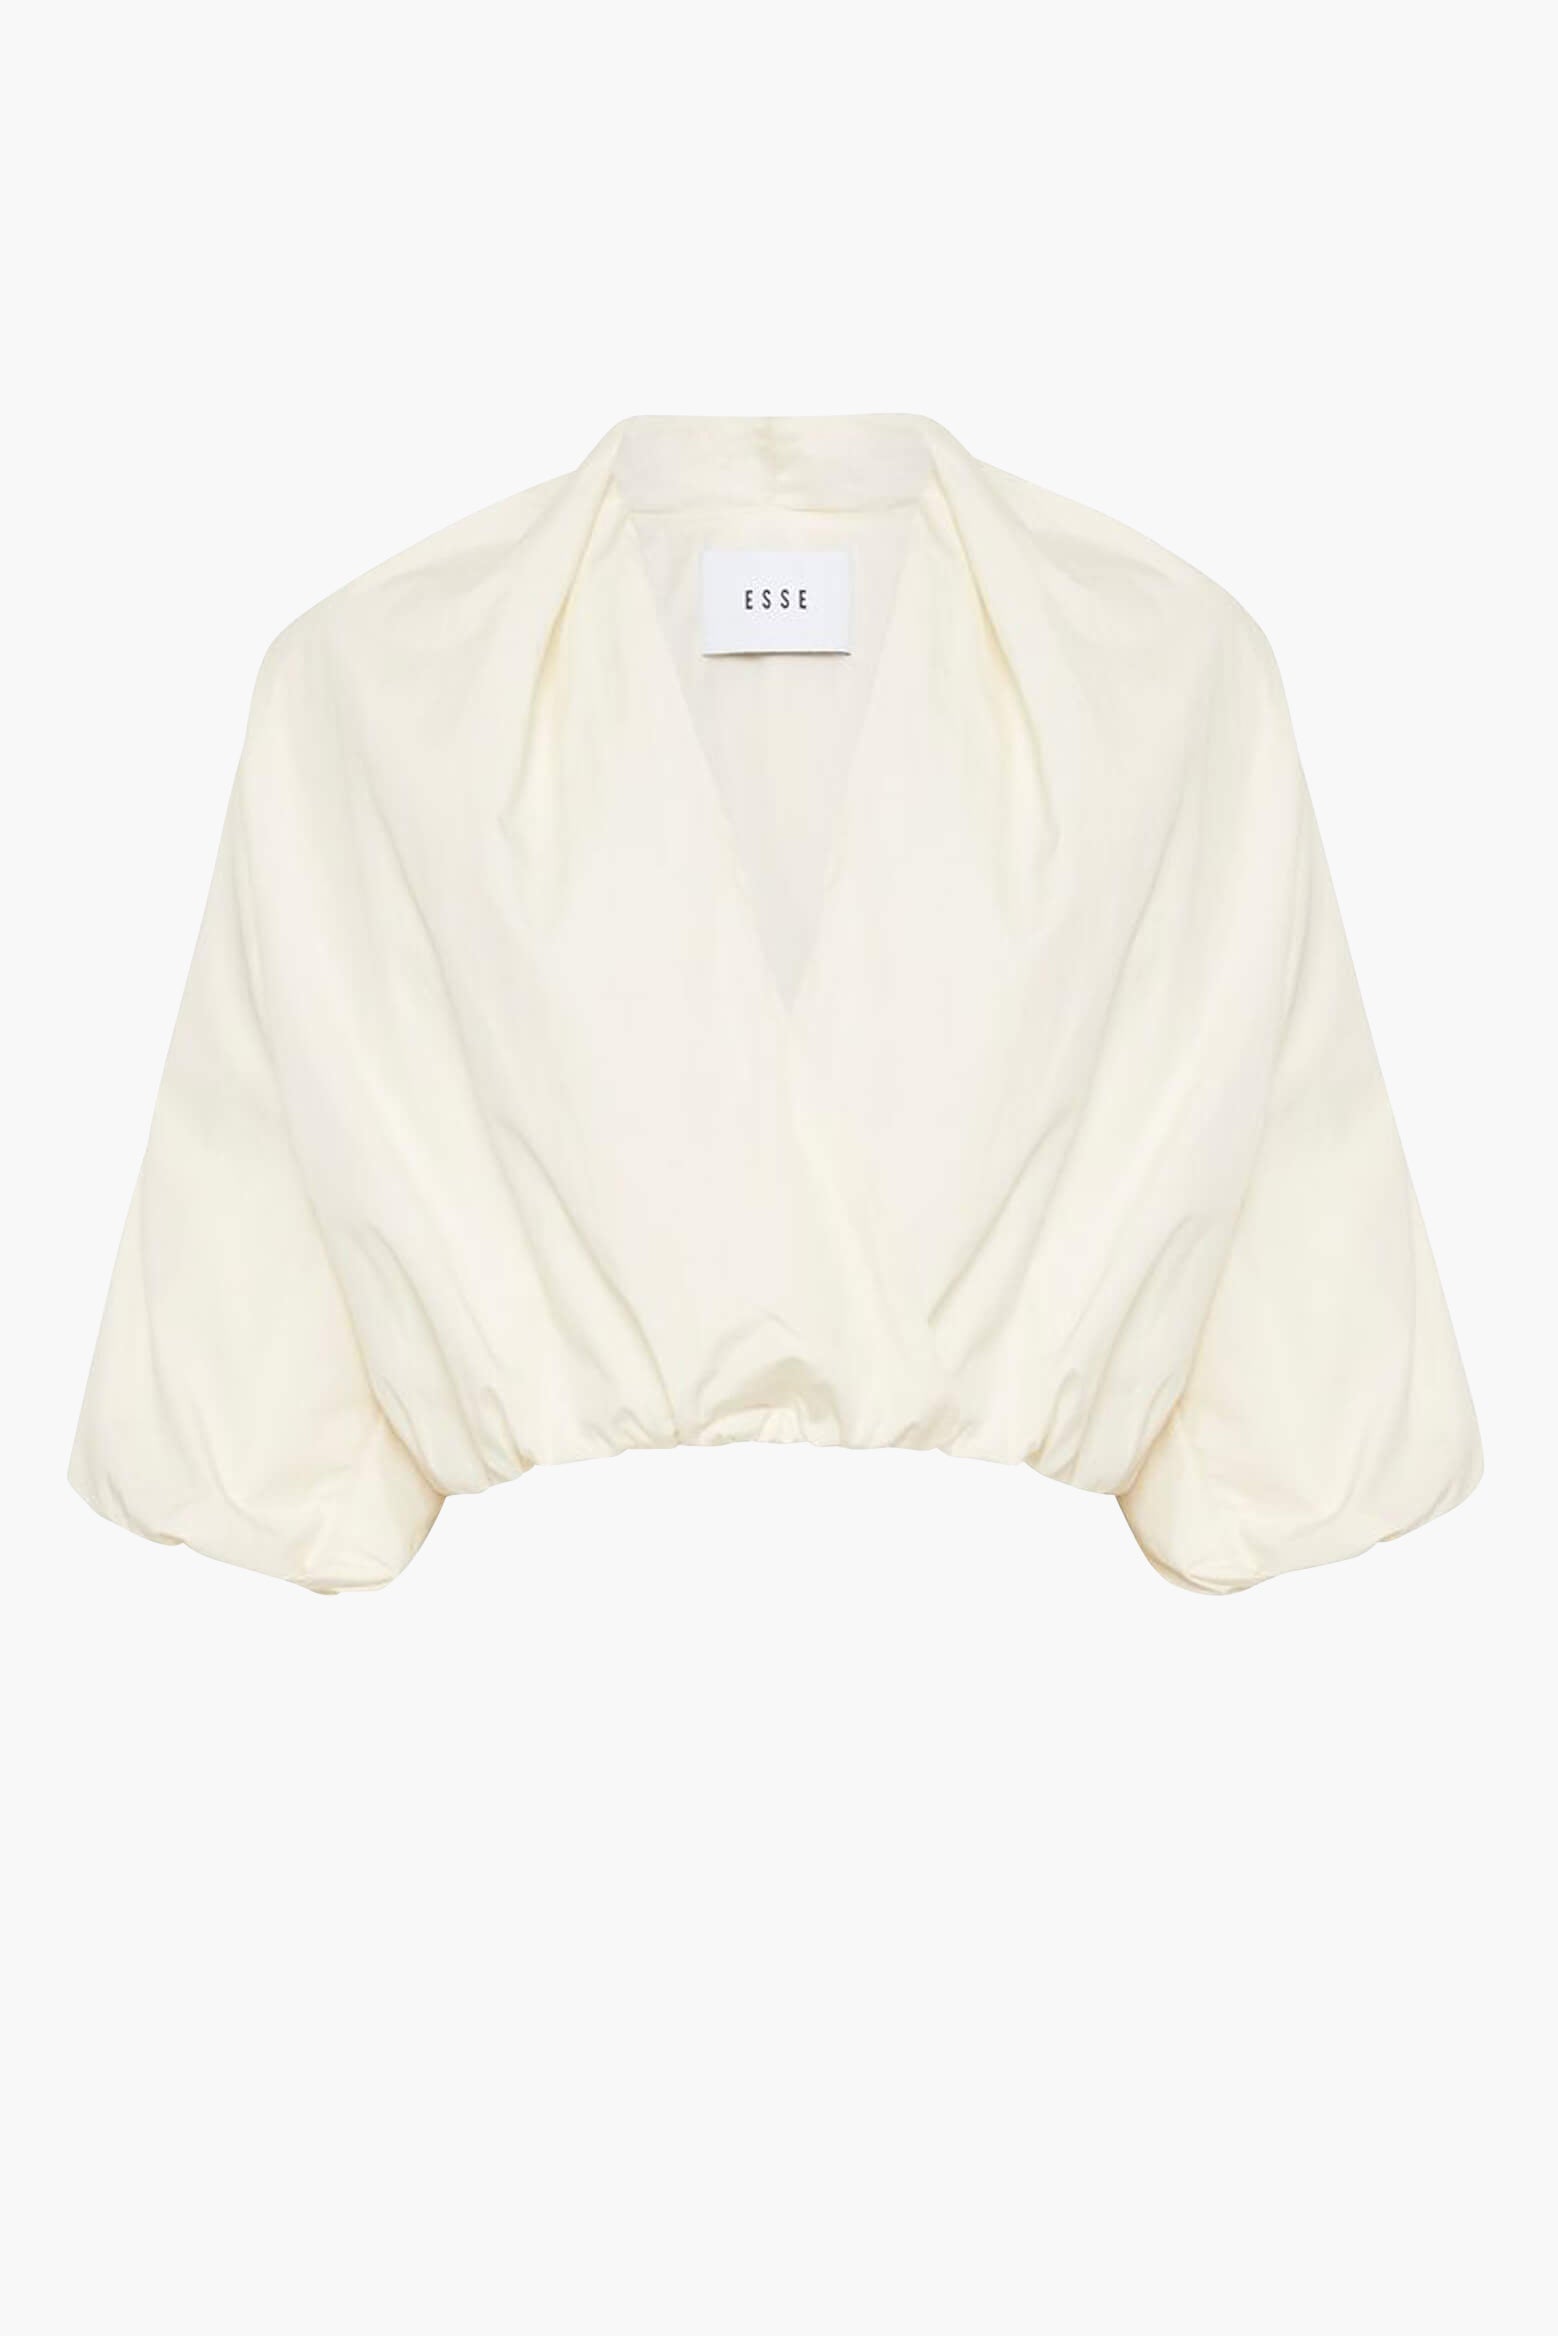 Esse Collected Cross Front Blouse in Crema from The New Trend